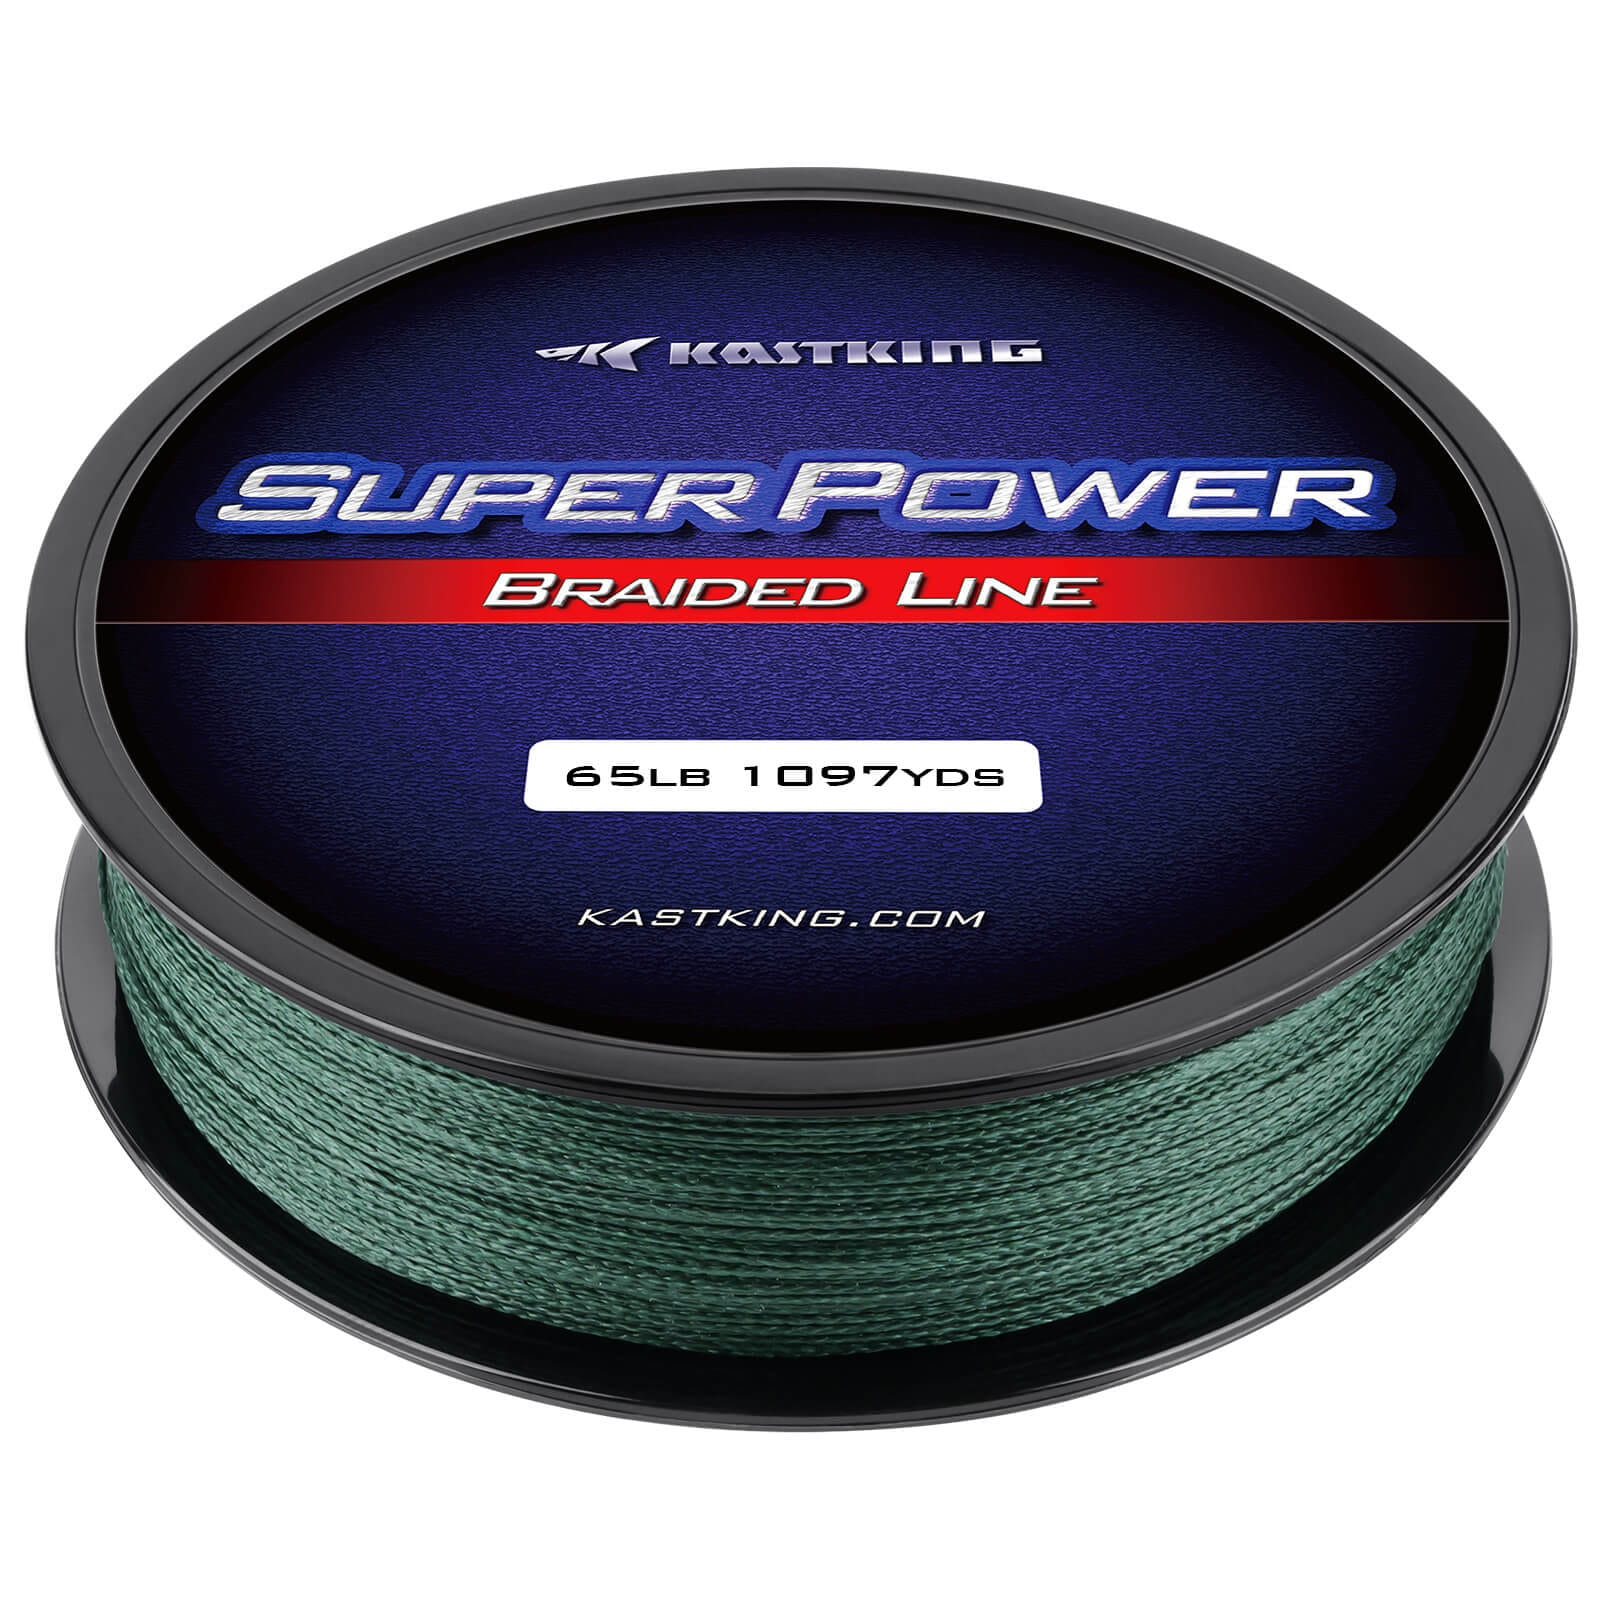 Kastking Superpower Silky8 Braided Line 8lbs strength test review